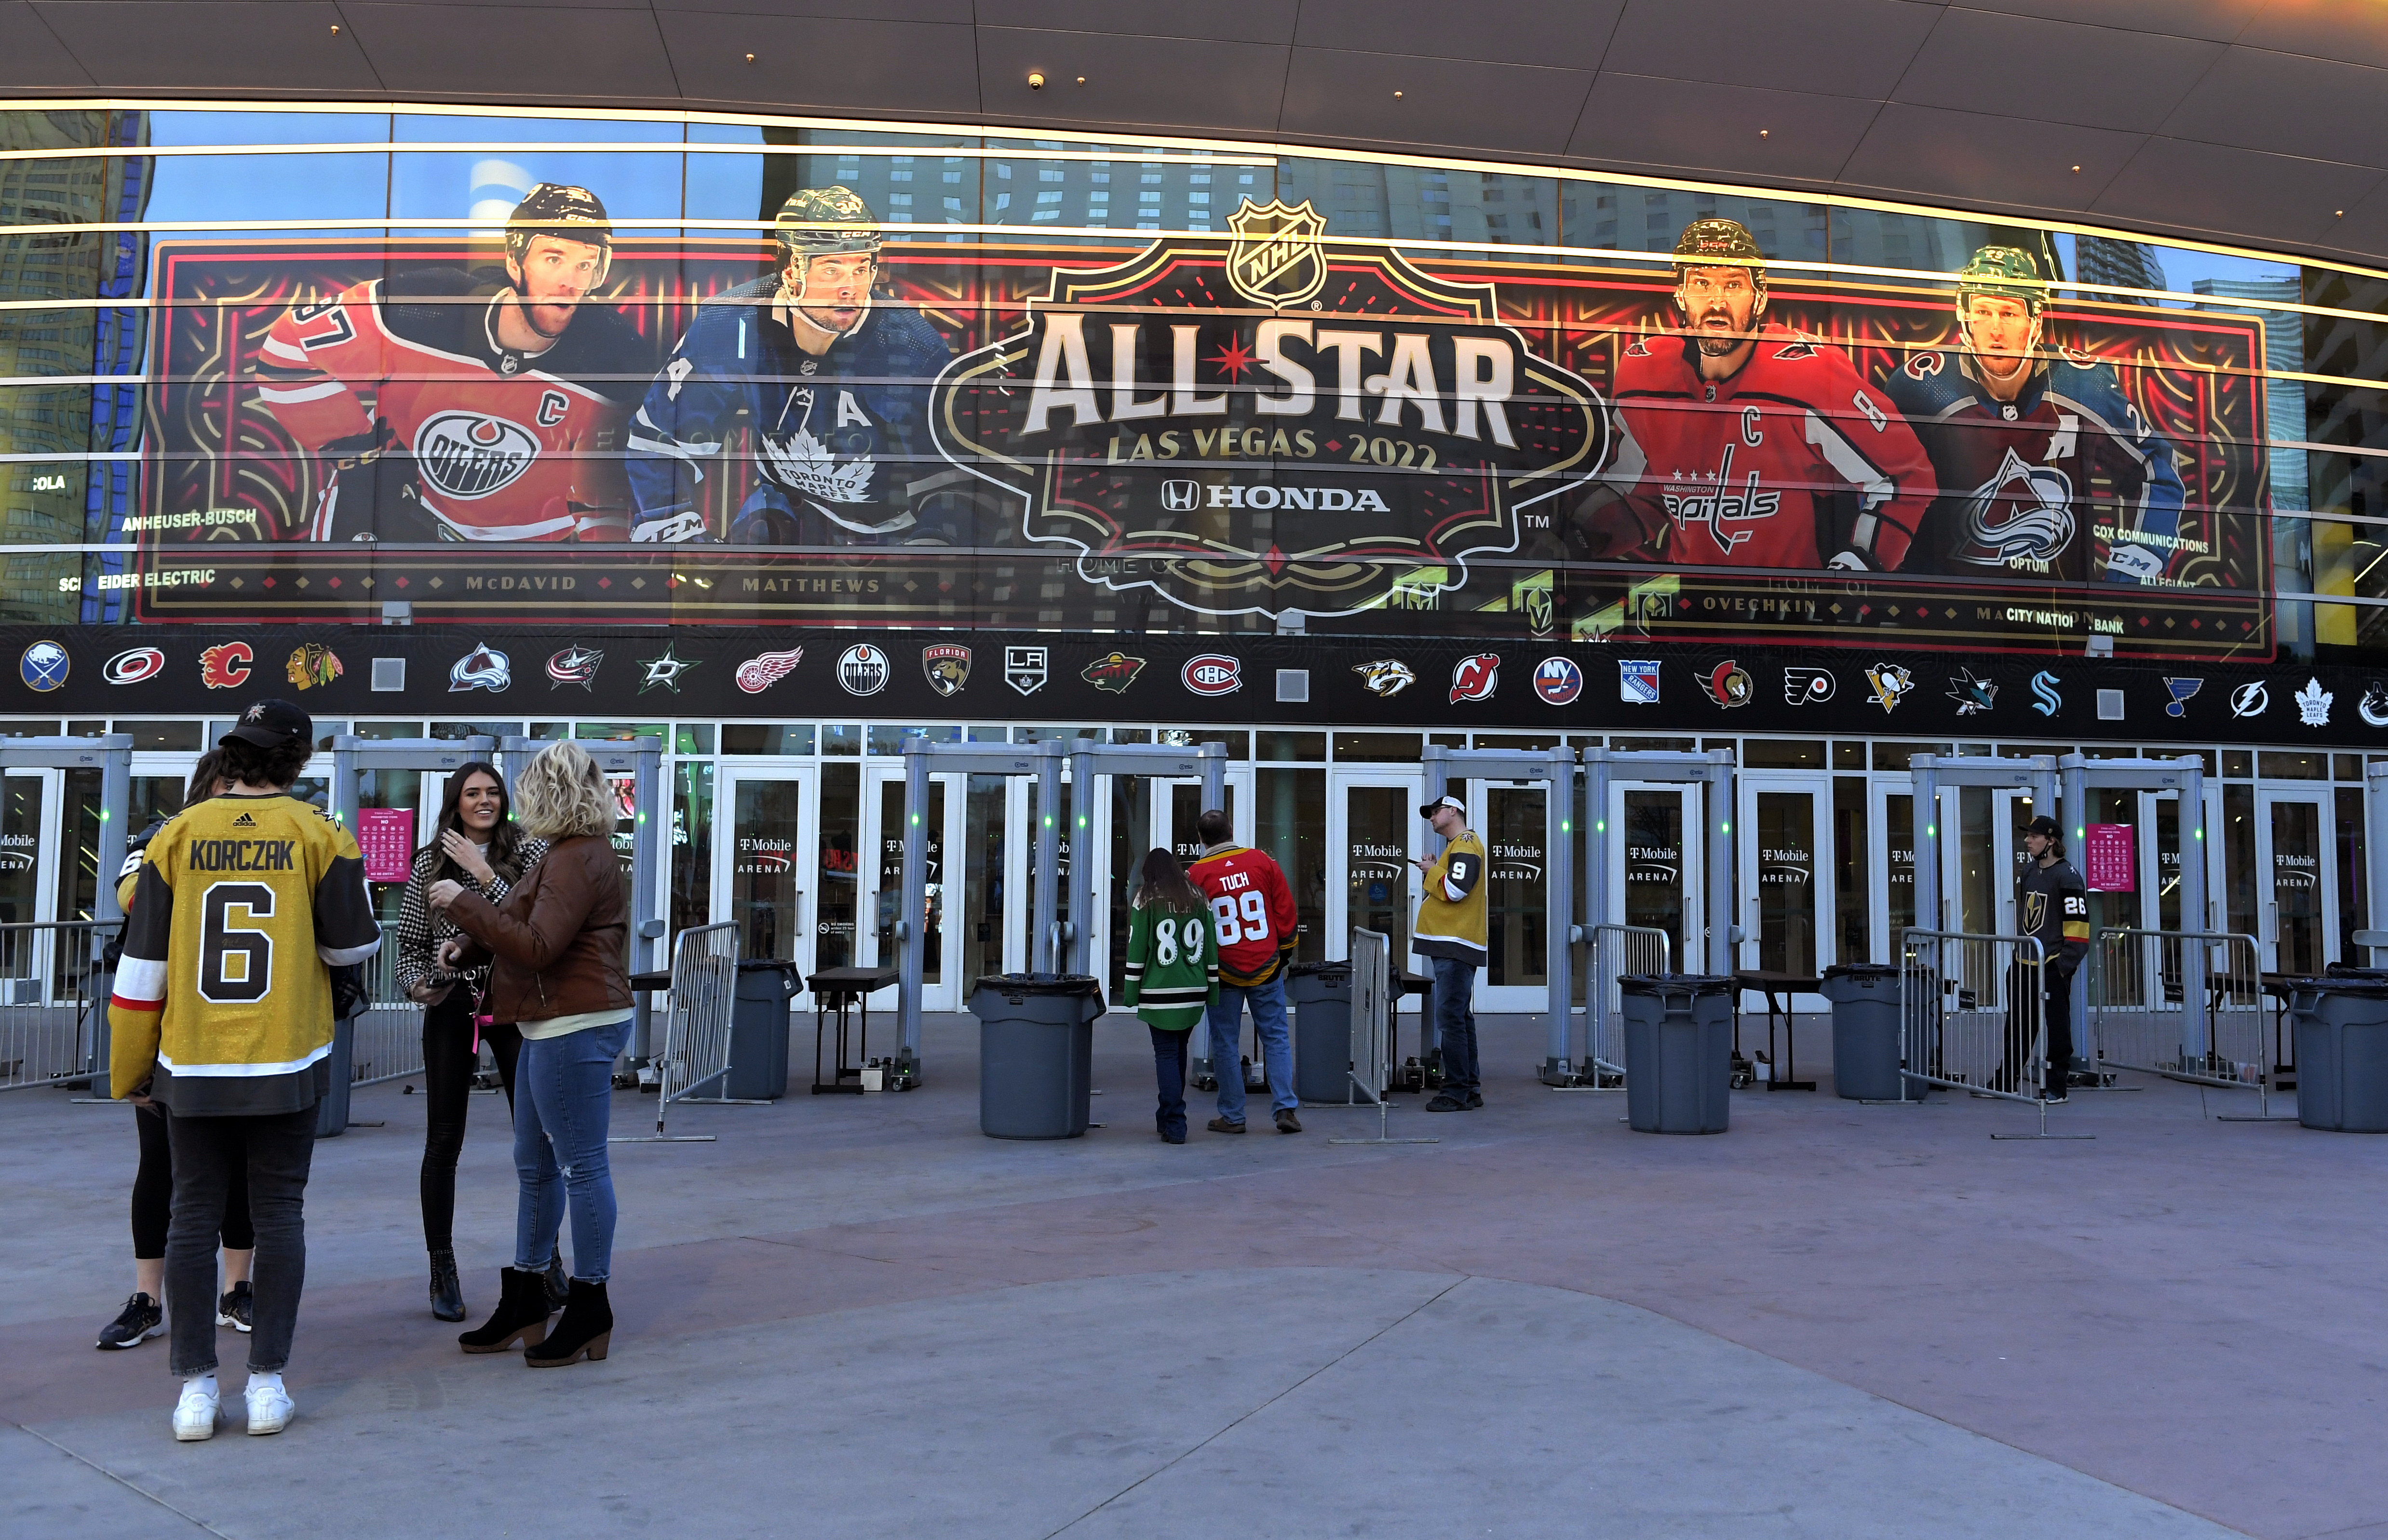 NHL All-Star Game 2022 FREE LIVE STREAM (2/5/22) Time, TV, channel, how to watch online, without cable